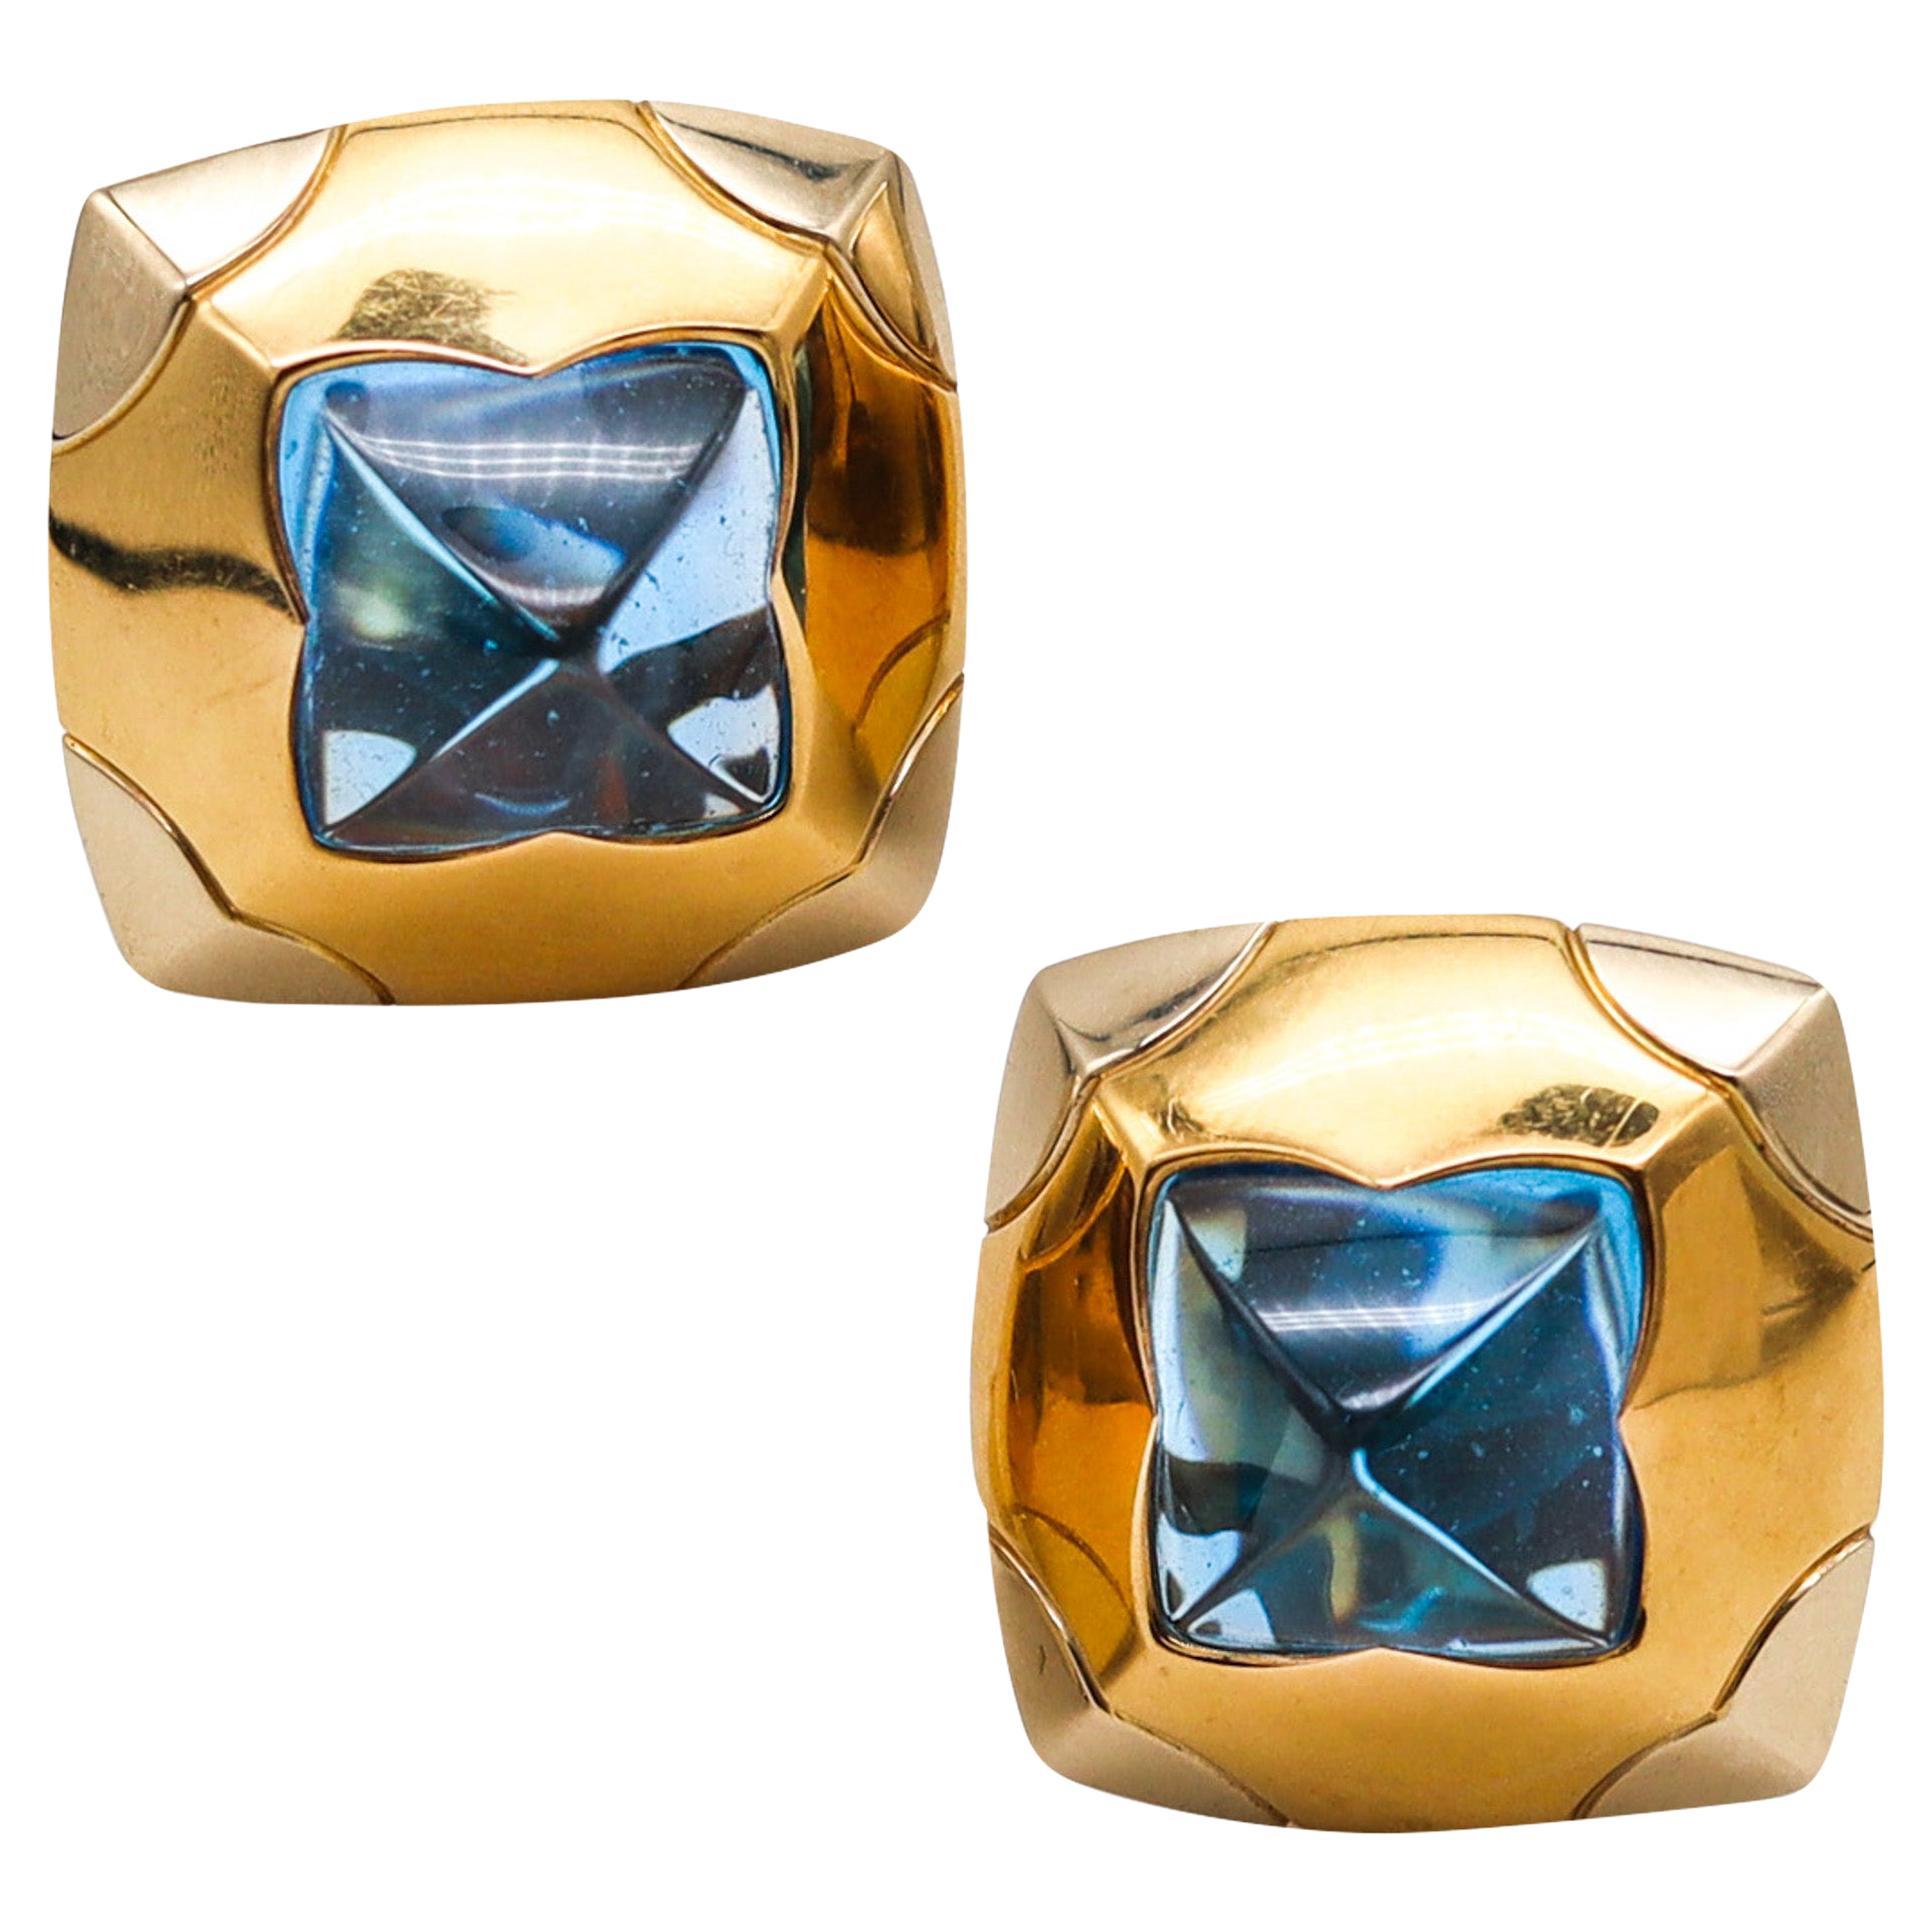 Bvlgari Roma Pyramid Clips Earrings in 18kt Gold with 36ctw Carved Blue Topaz